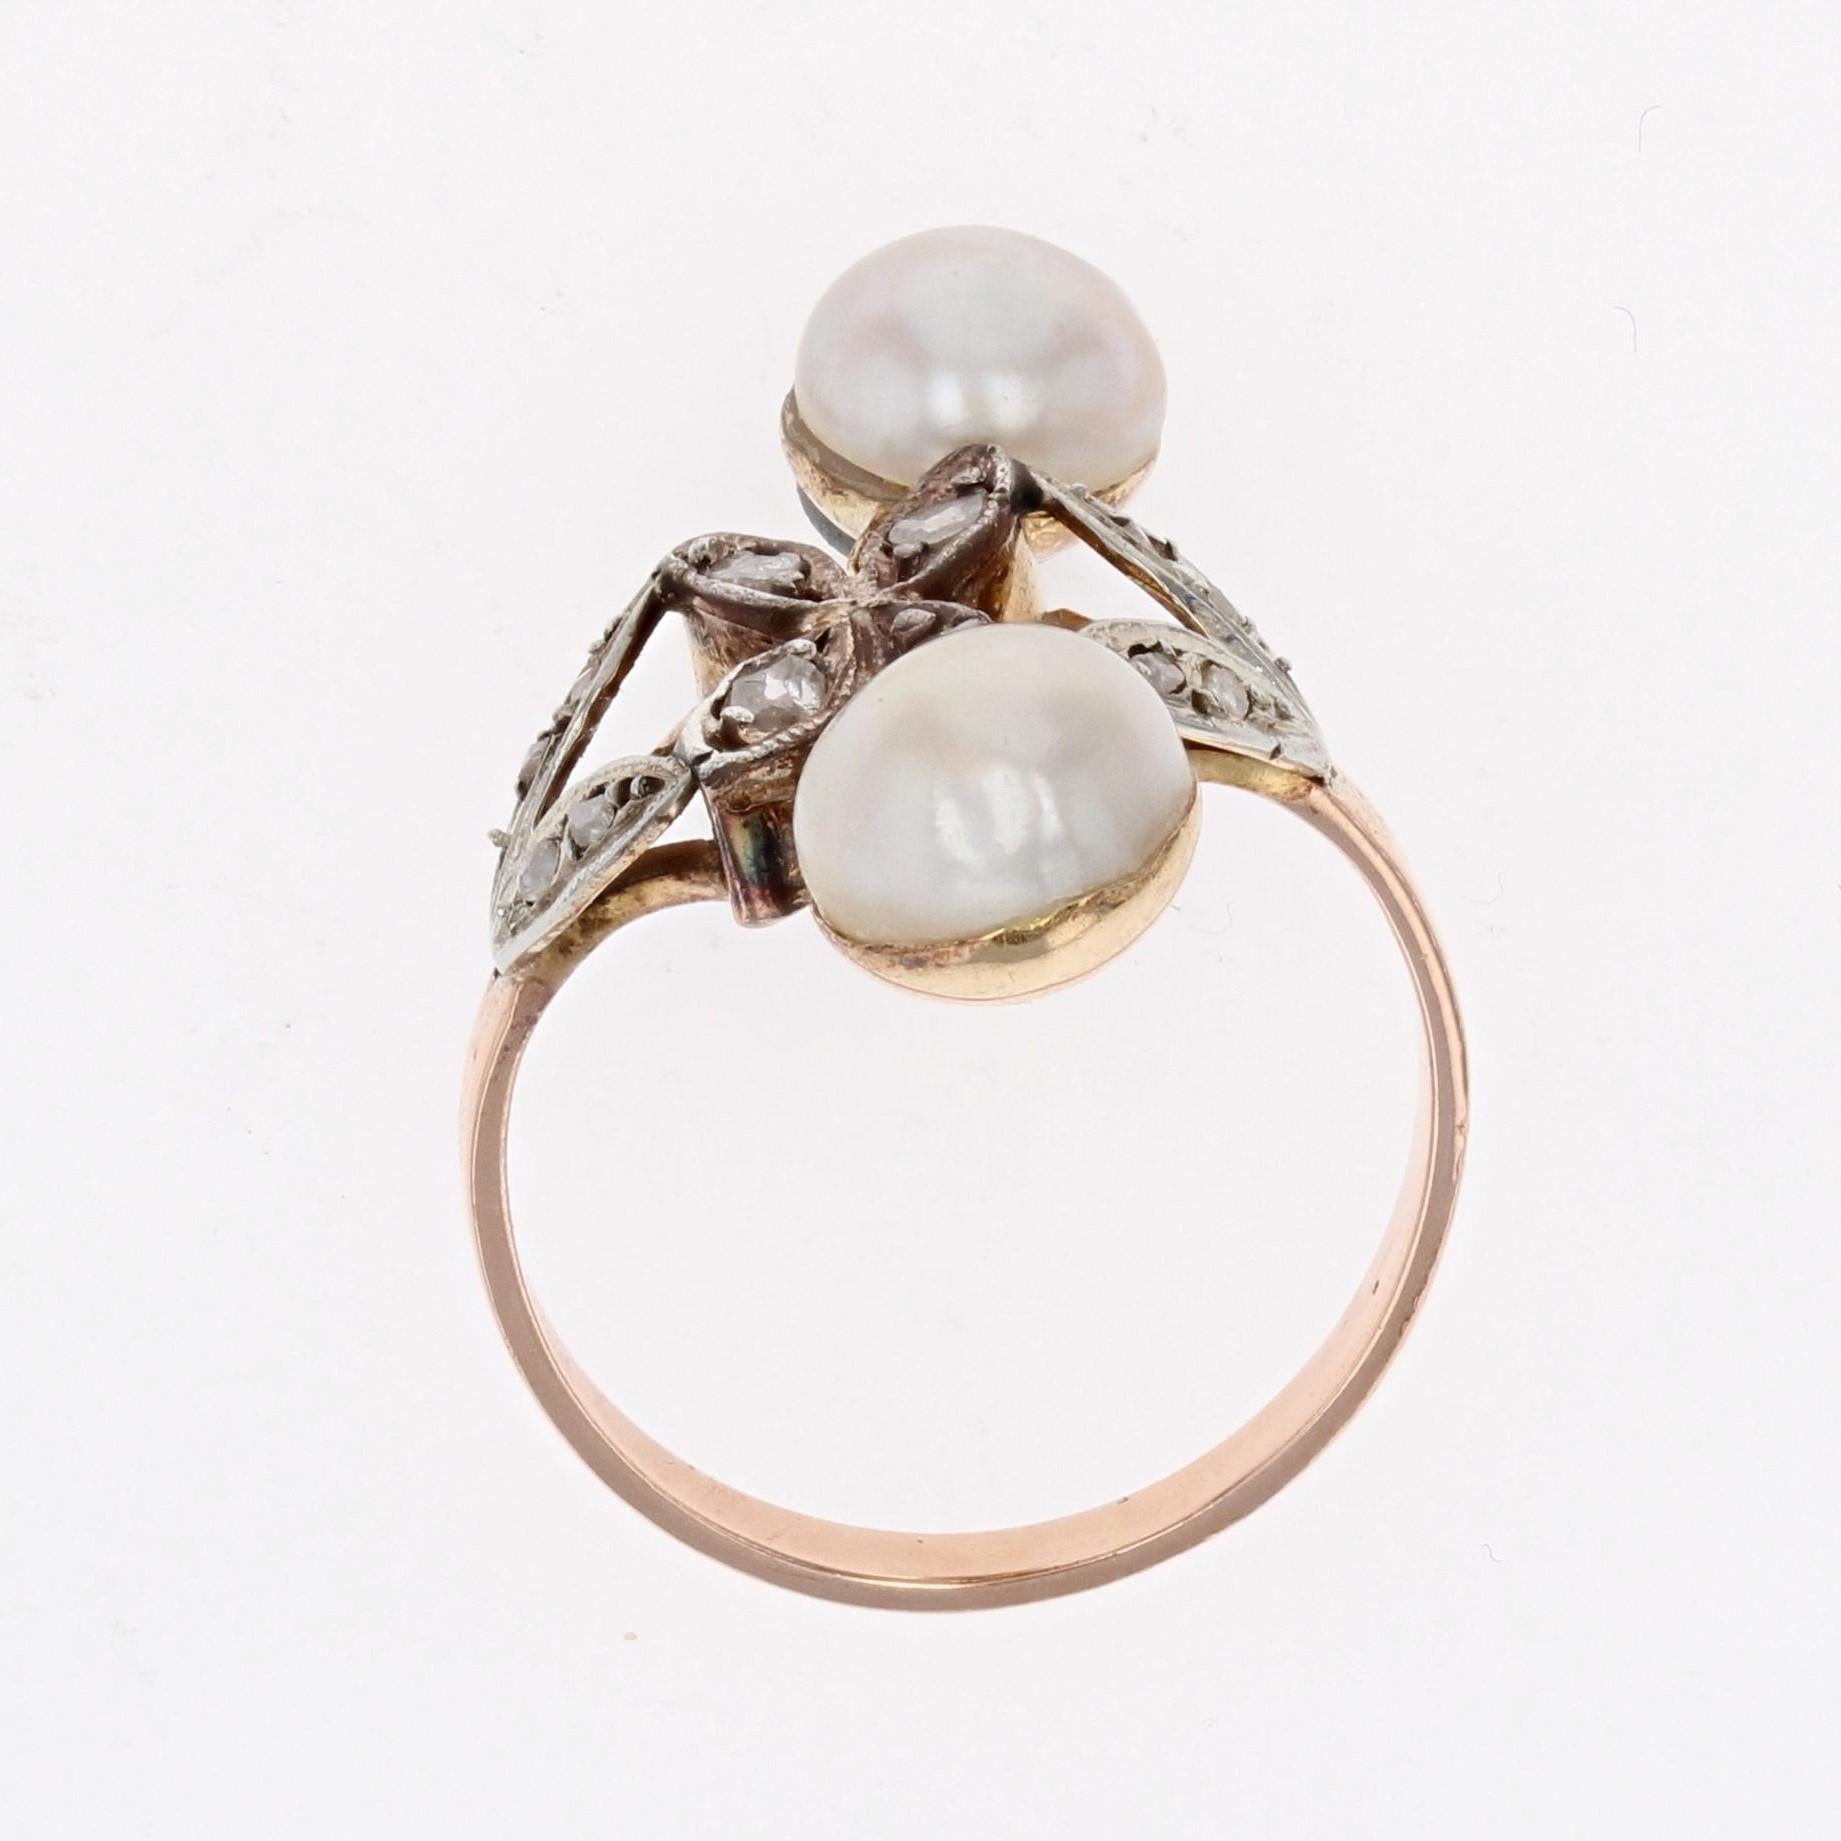 19th Century Duo Mabé Pearls Diamonds 18 Karat Rose Gold Ring For Sale 6